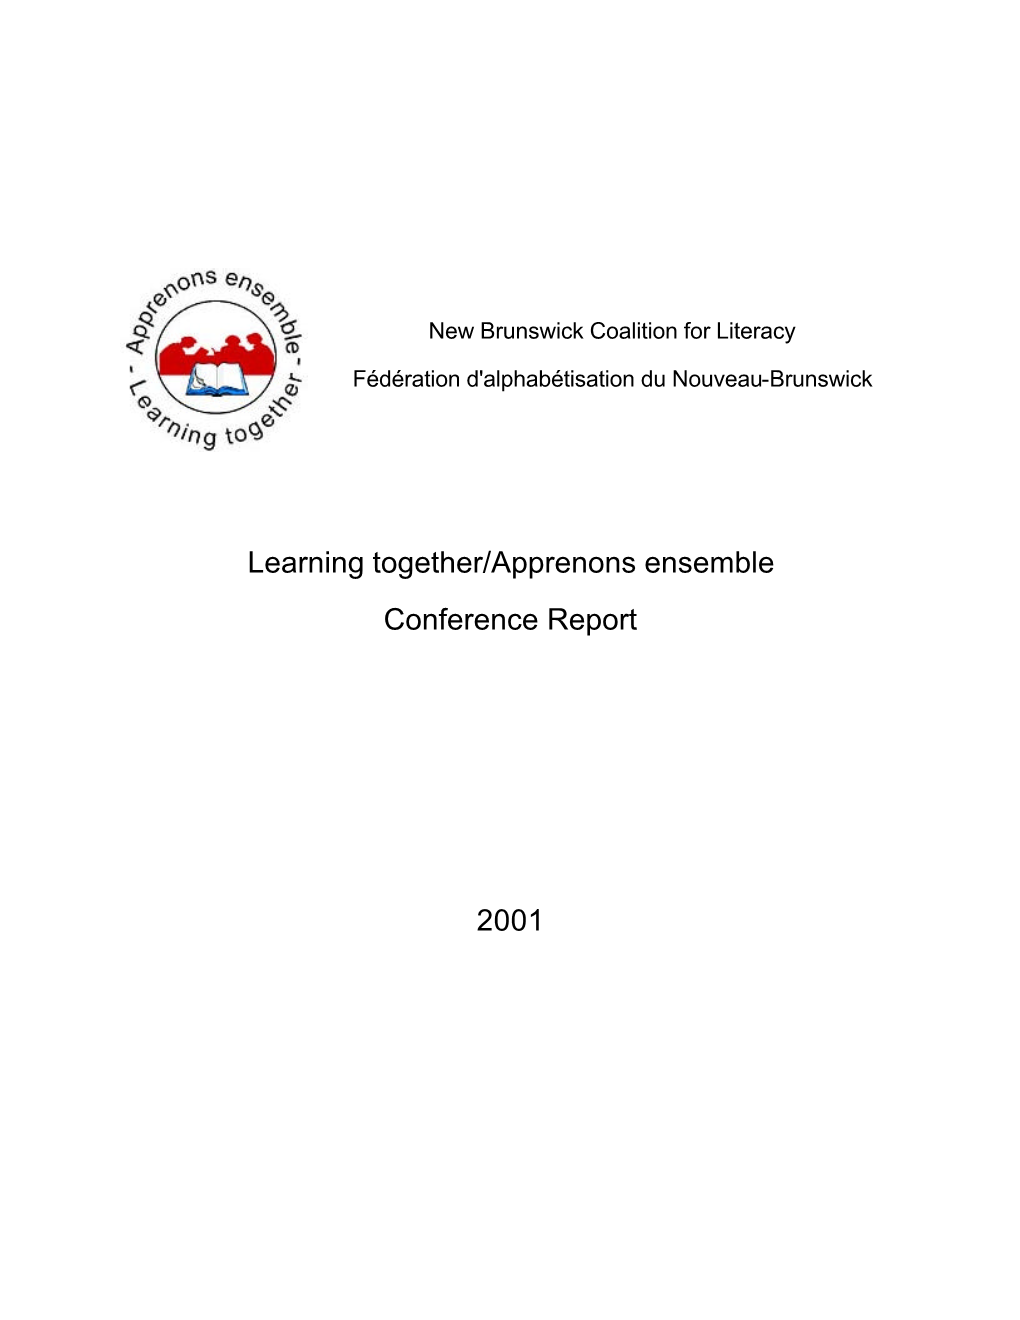 Learning Together/Apprenons Ensemble Conference Report 2001